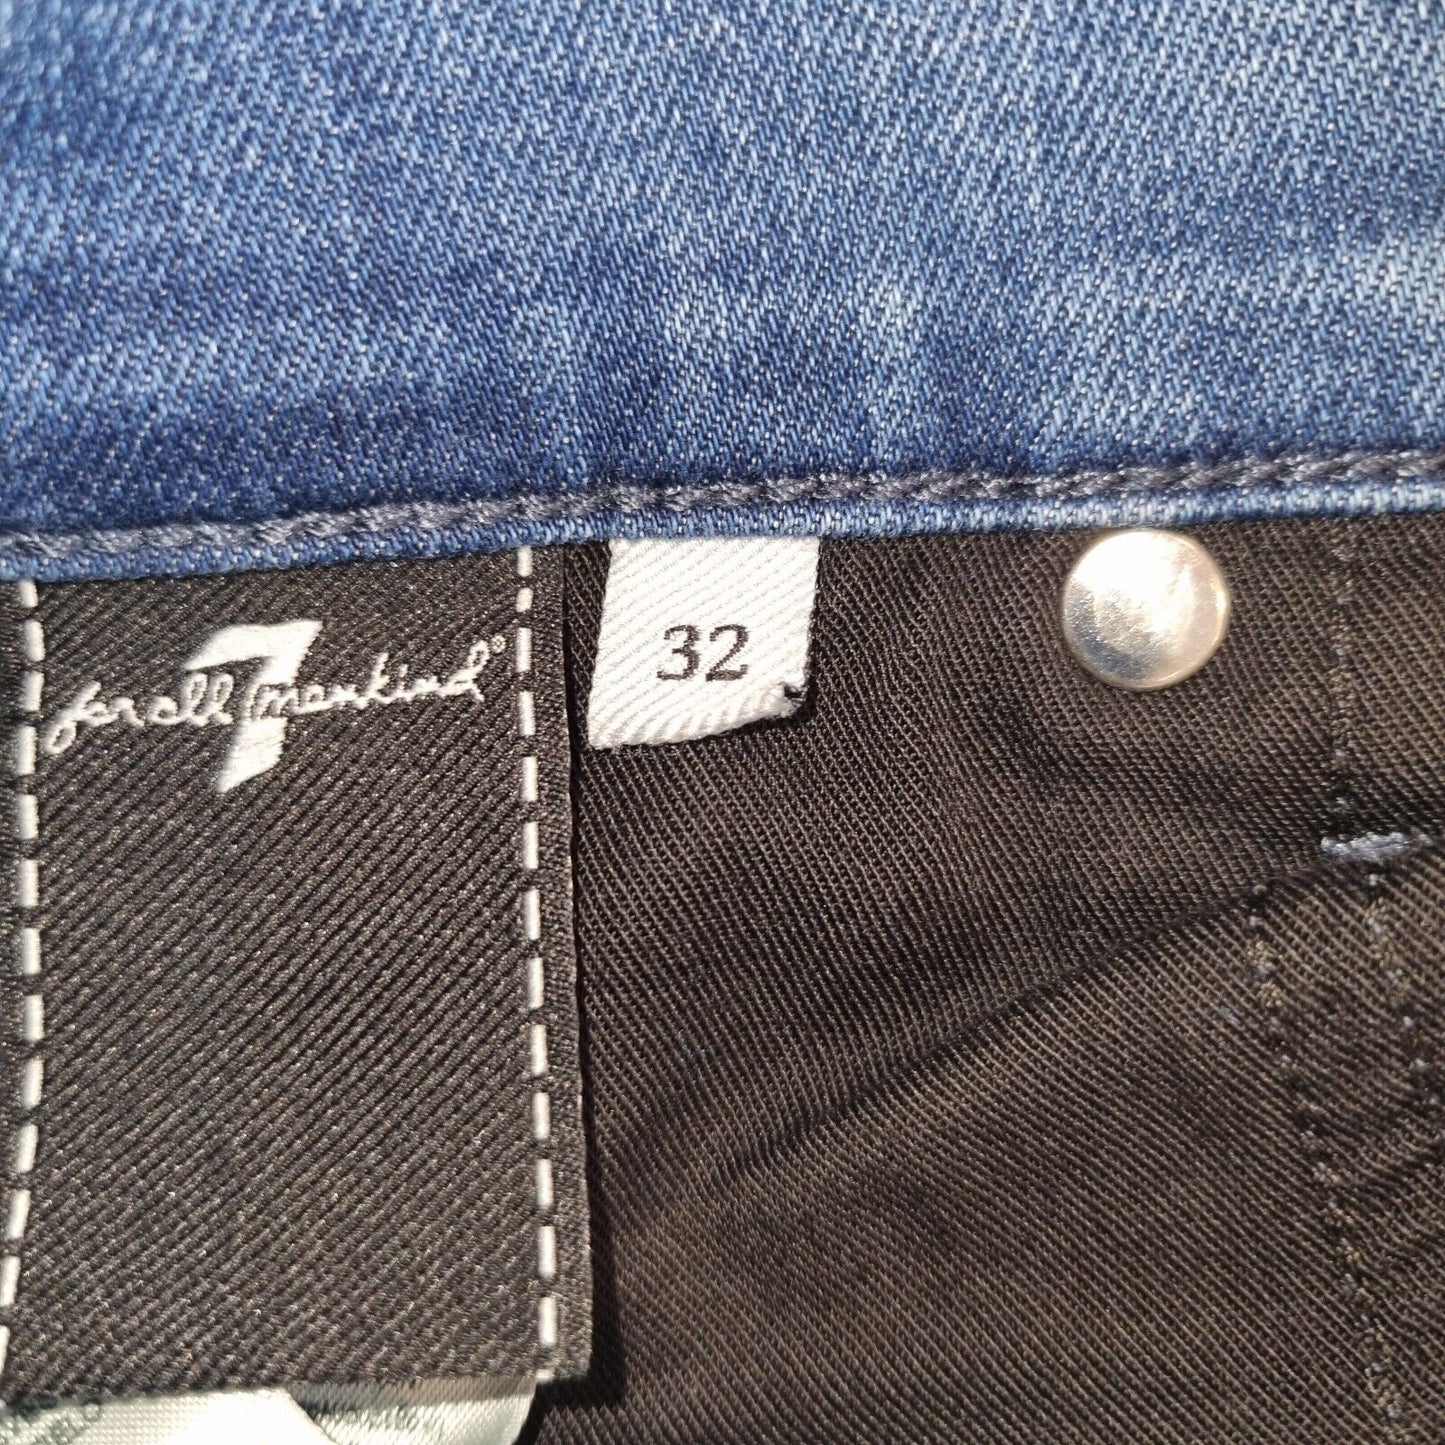 7 For All Mankind Mens Jeans Blue Cotton Straight Size 32 in L30 in Regular Butt - Bonnie Lassio